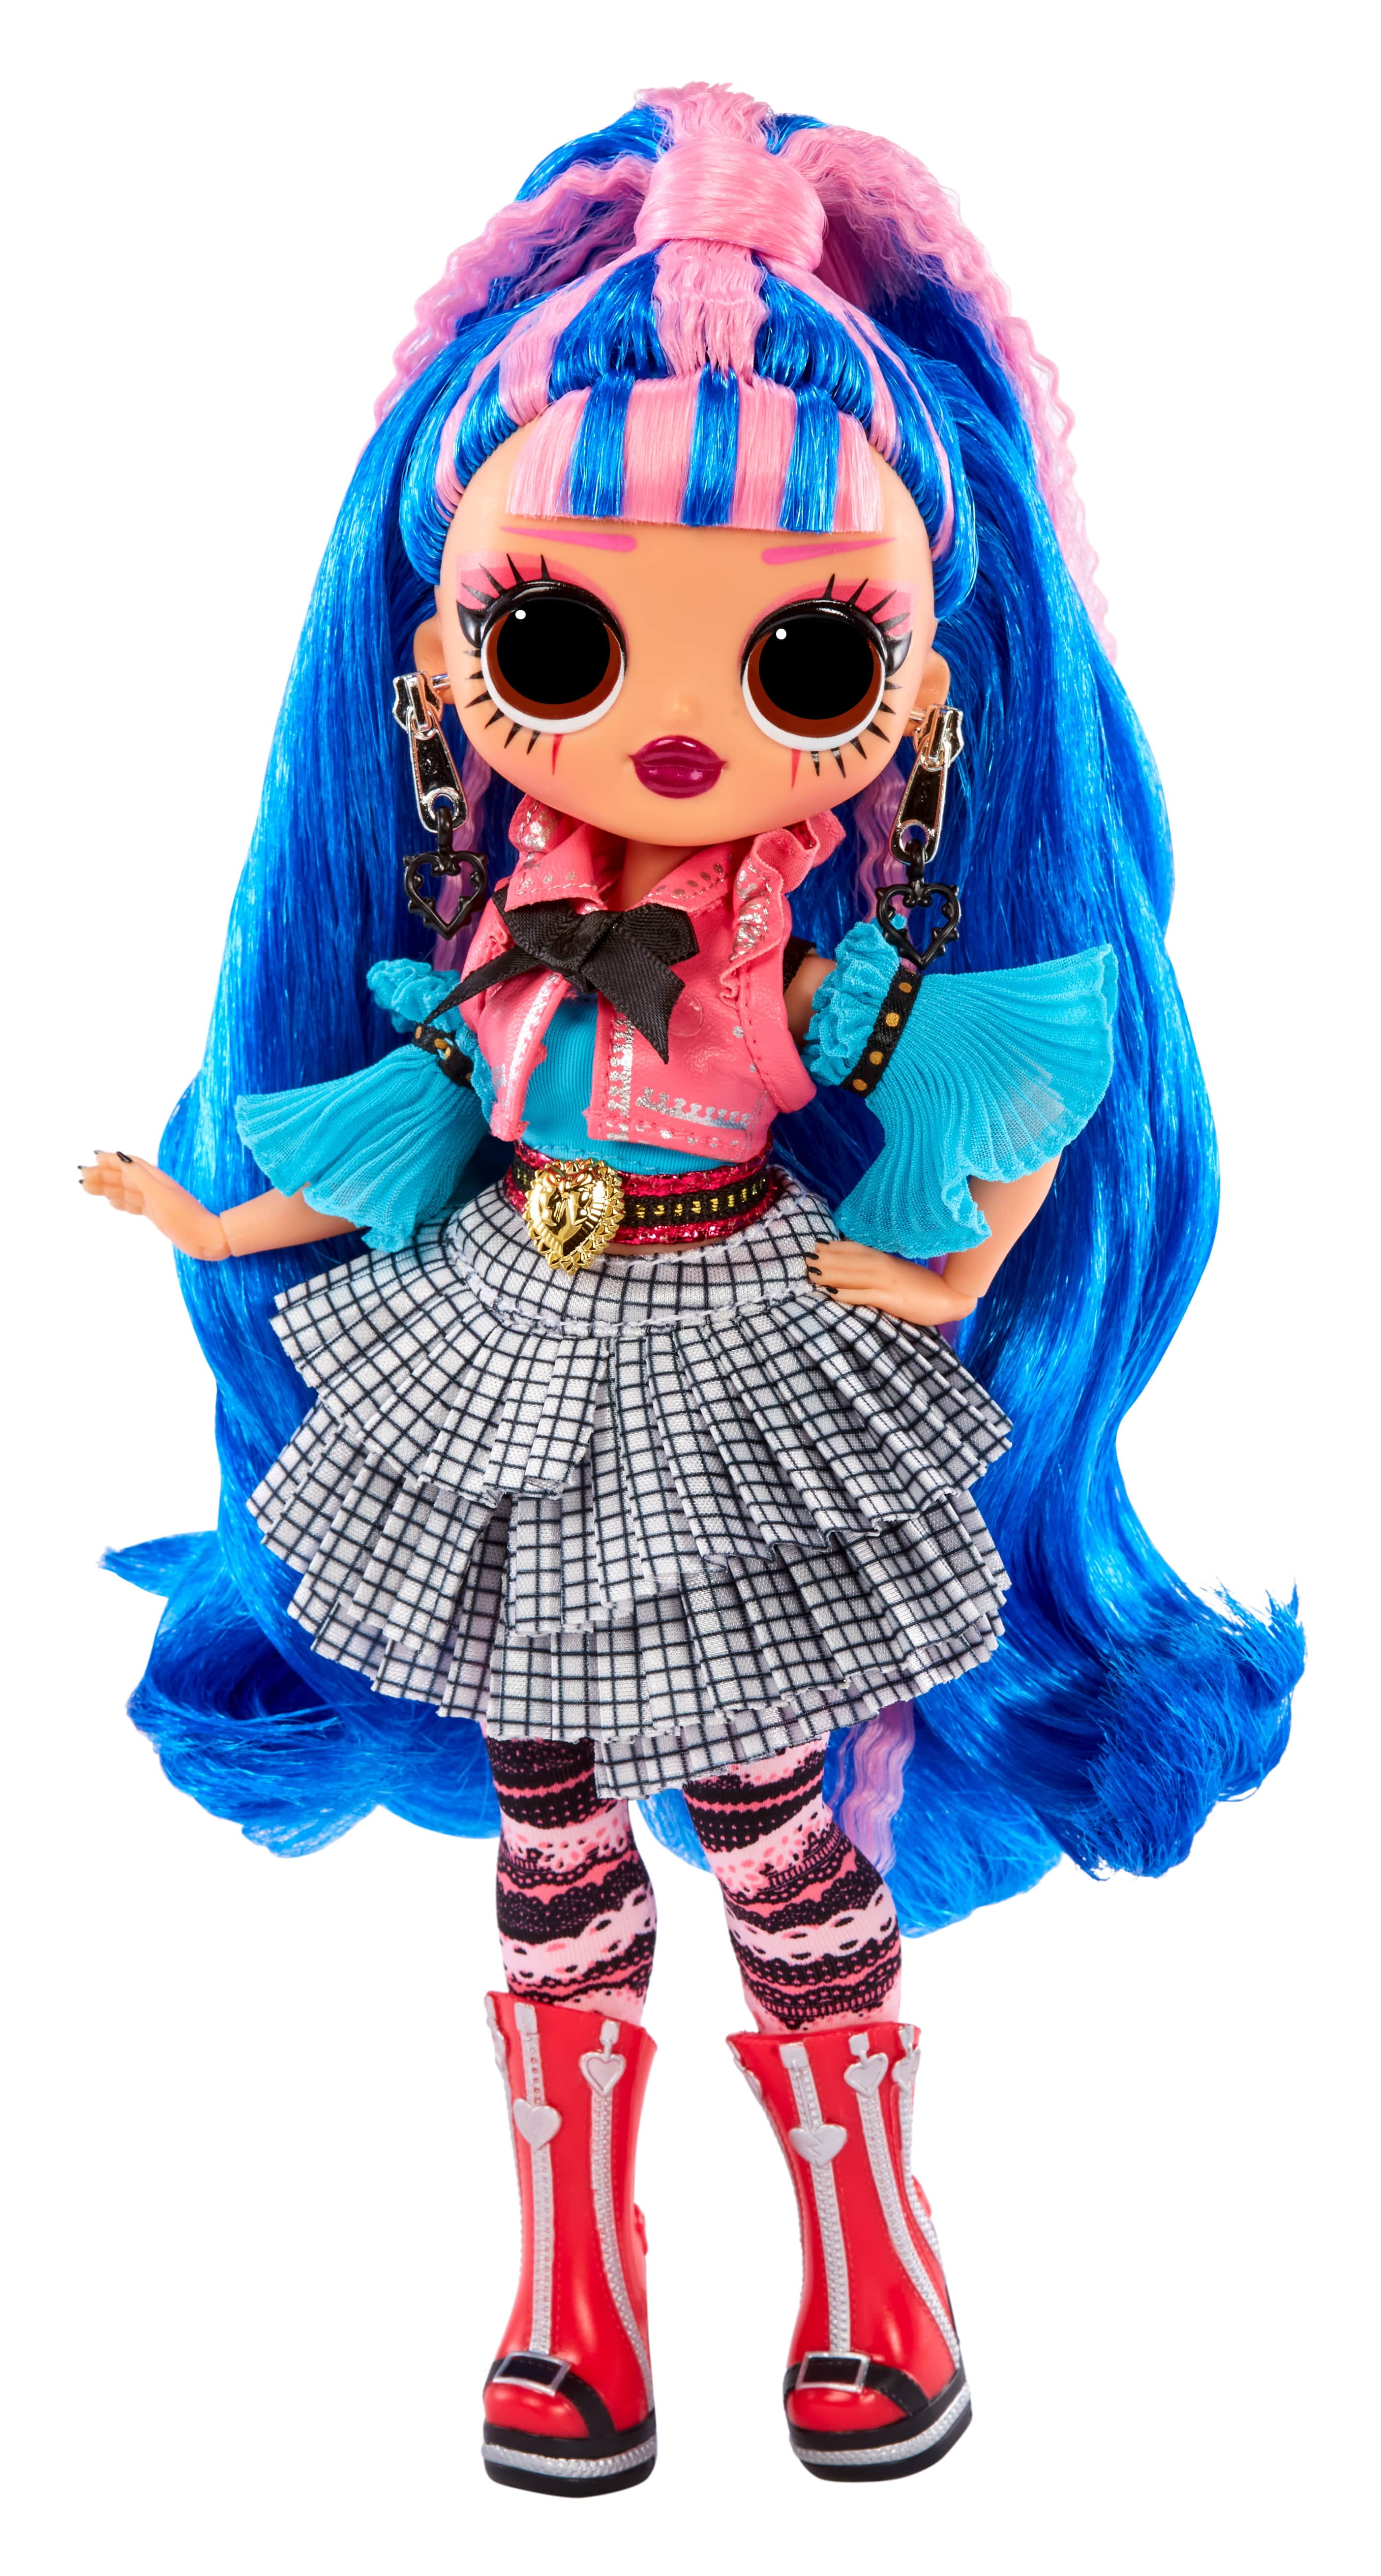 LOL Surprise OMG Queens Prism Fashion Doll with 20 Surprises Including  Outfit and Accessories for Fashion Toy, Girls Ages 3 and up, 10-inch doll -  